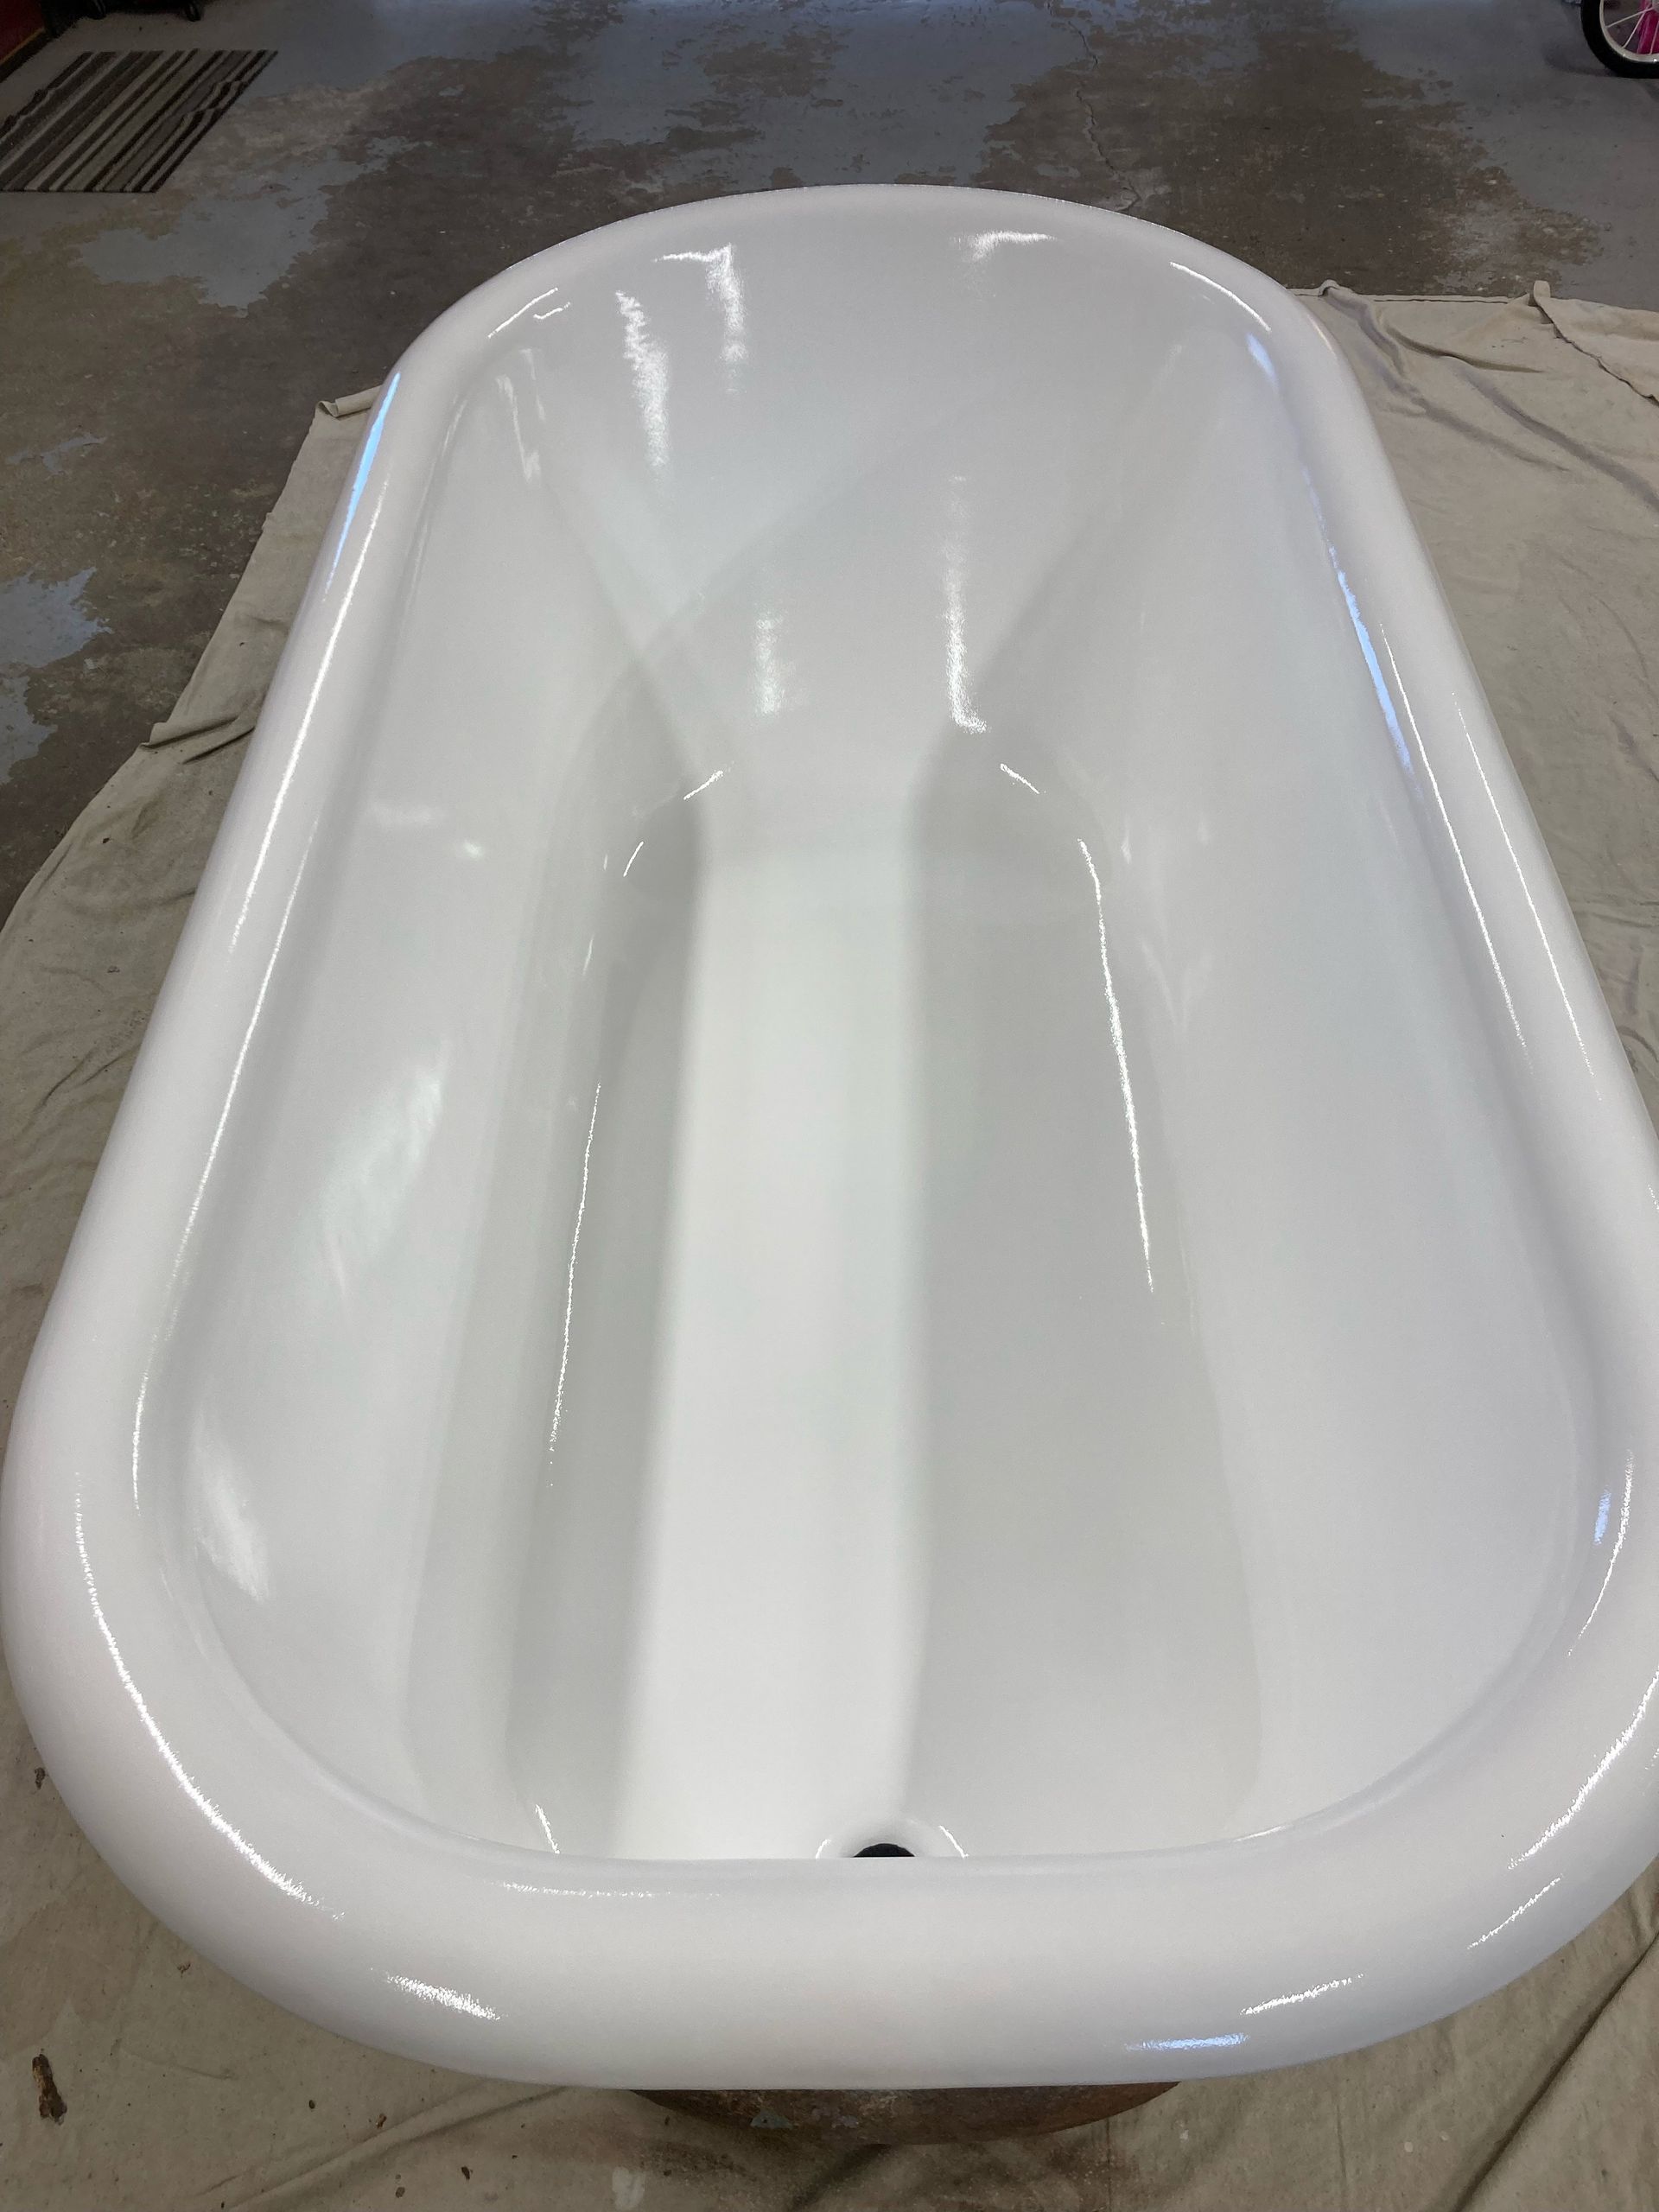 After Cleaning of Solo Bathtub - Central Illinois | Surface Savers